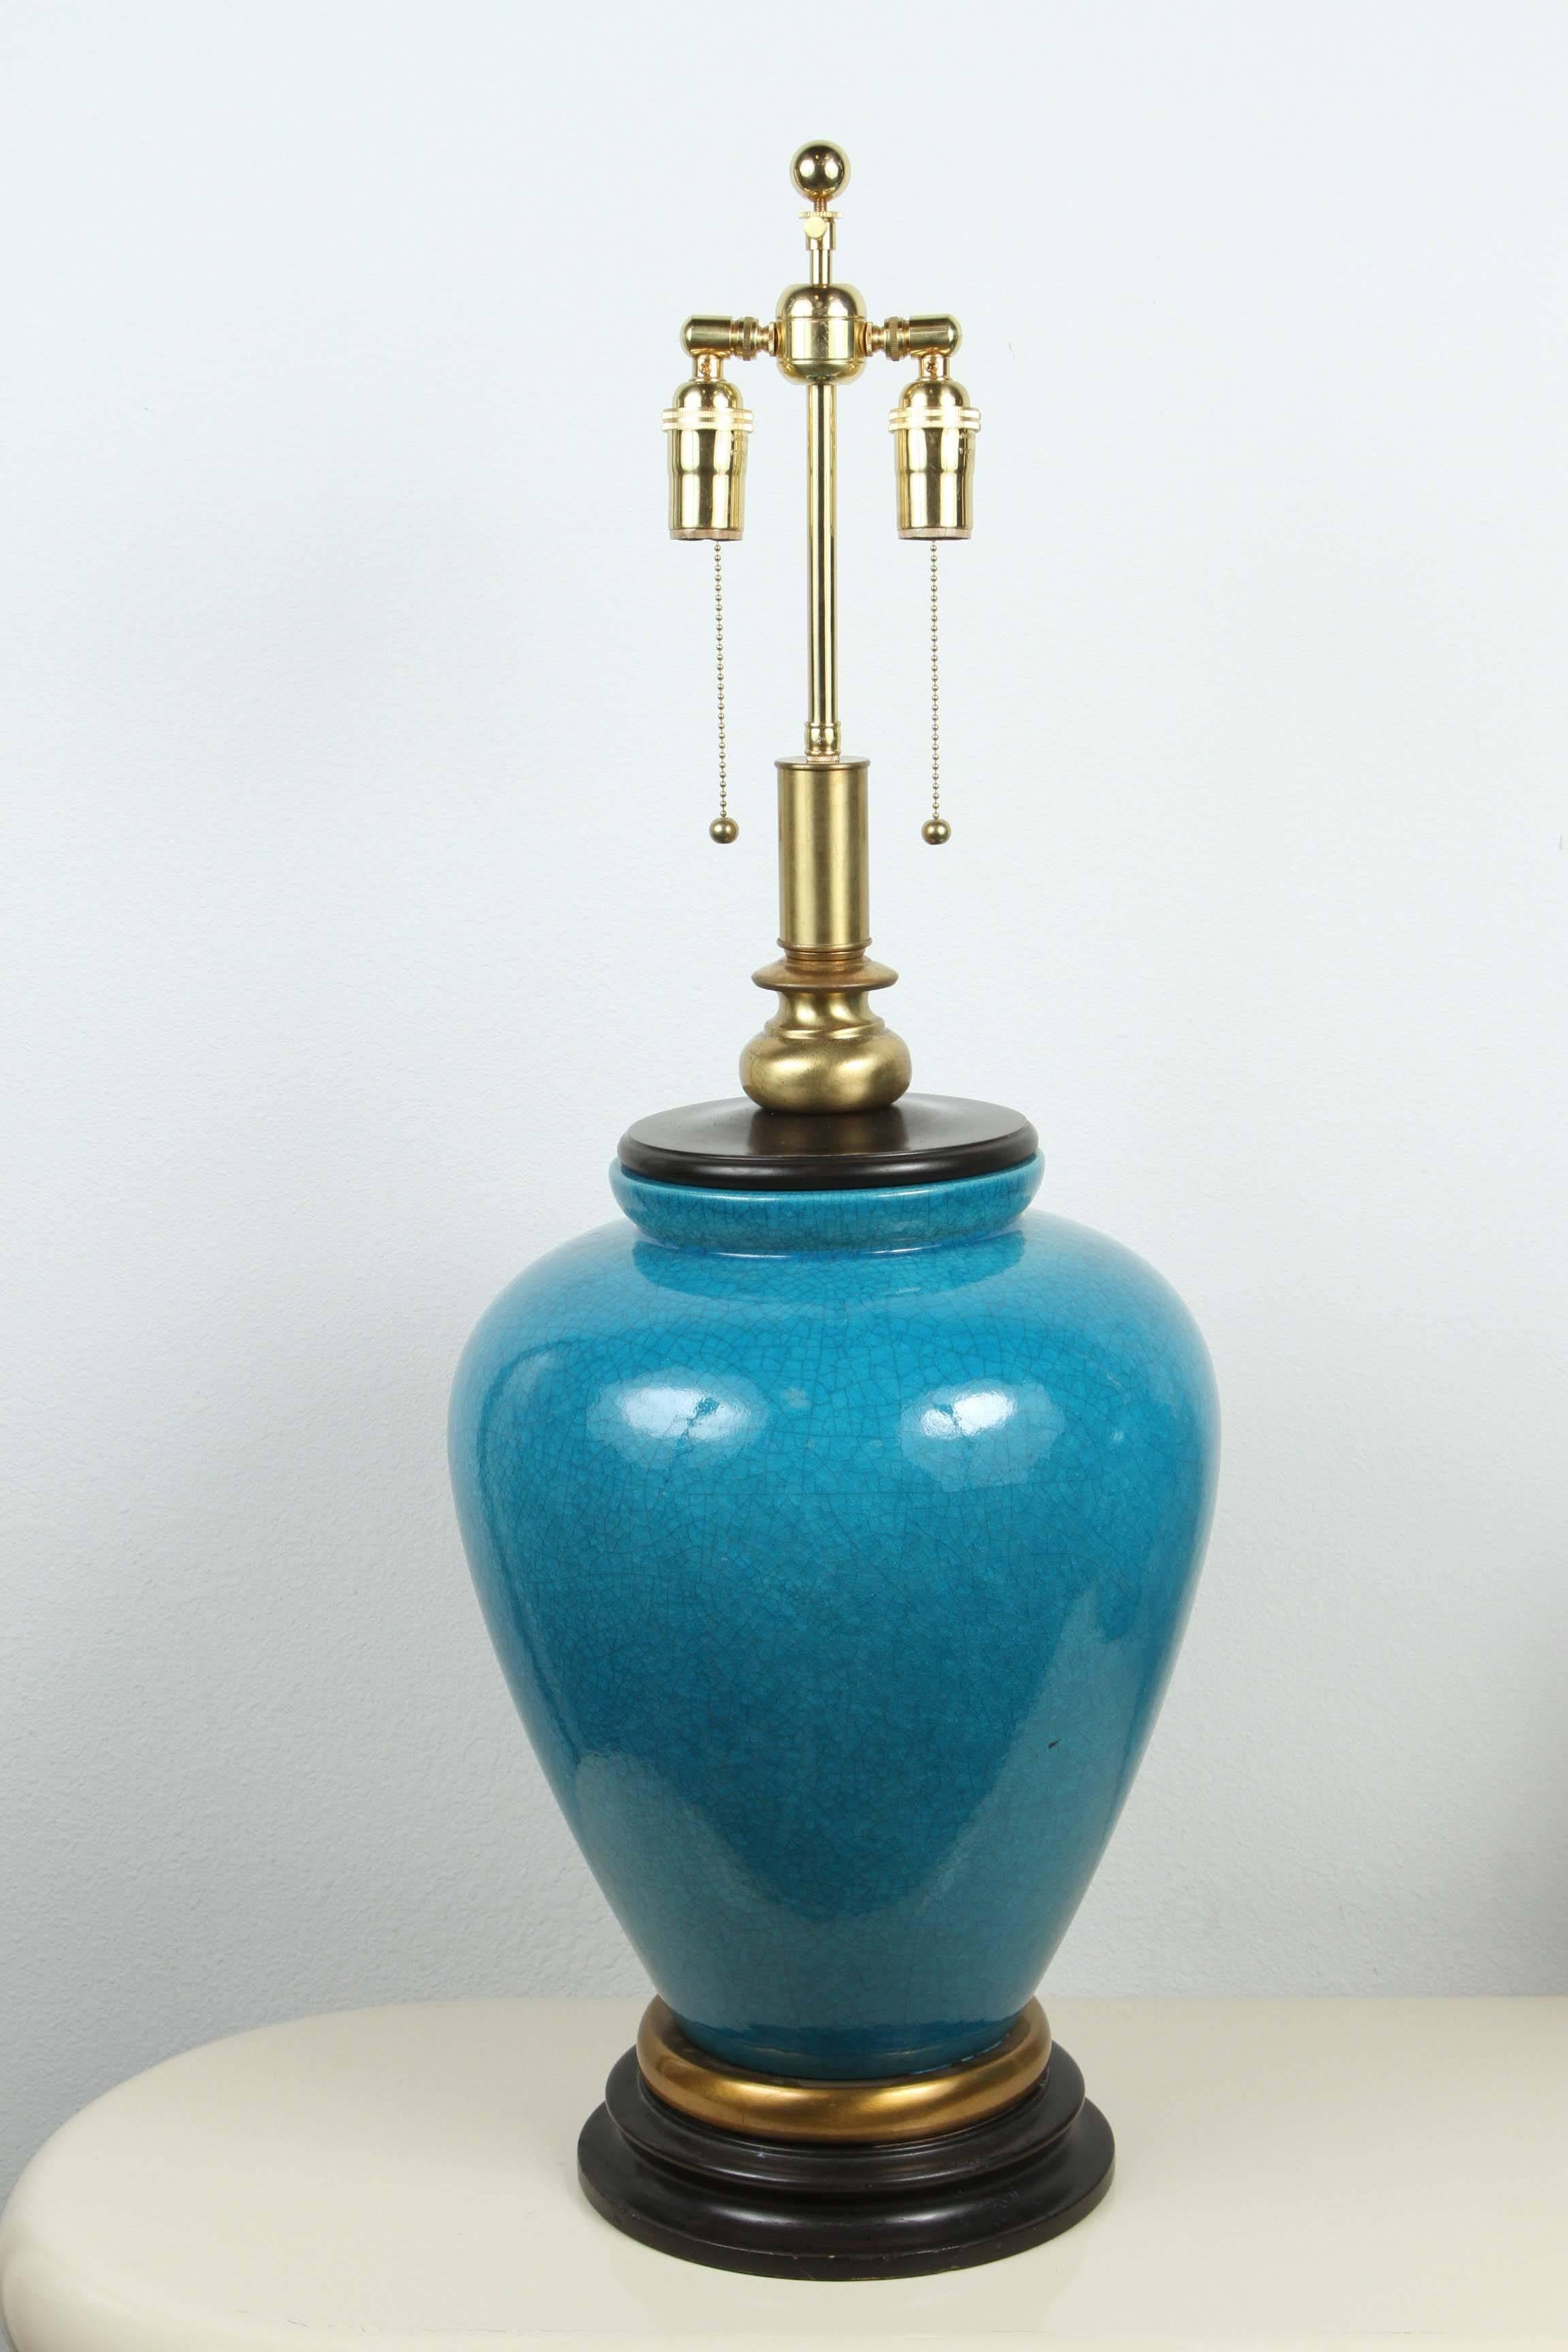 Gorgeous pair of large ceramic table lamps by Frederick Cooper. 
The lamps have a beautiful crackled glaze finishing a pure cerulean blue, which is enhanced by black and brass appointments.
The lamps have been newly rewired with brass double